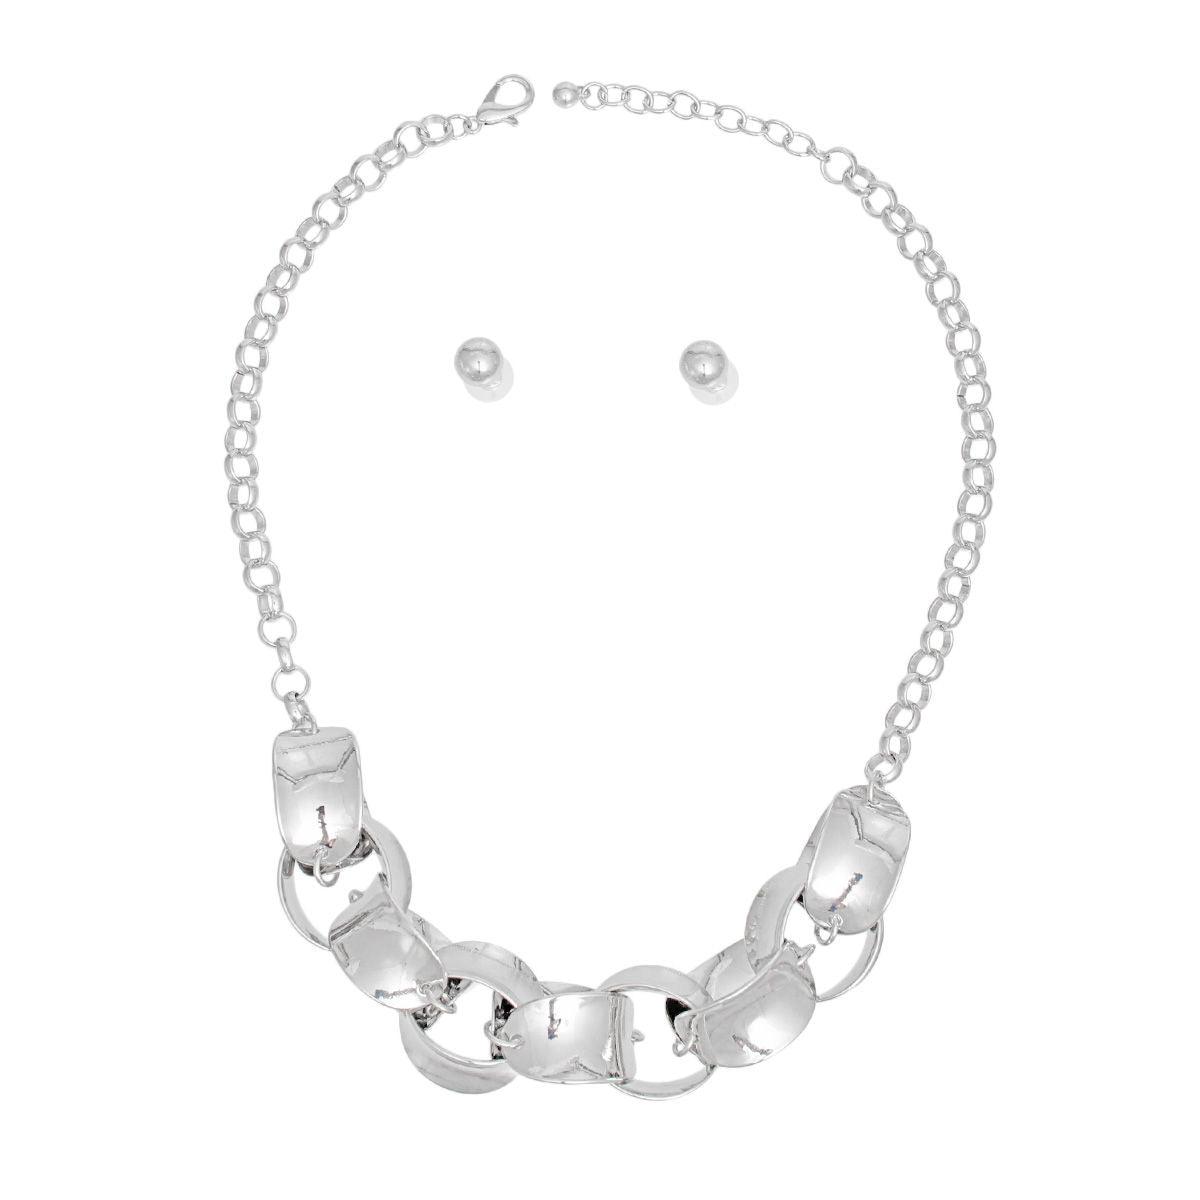 Everyday Ladies Modernist Link Chain Necklace Set